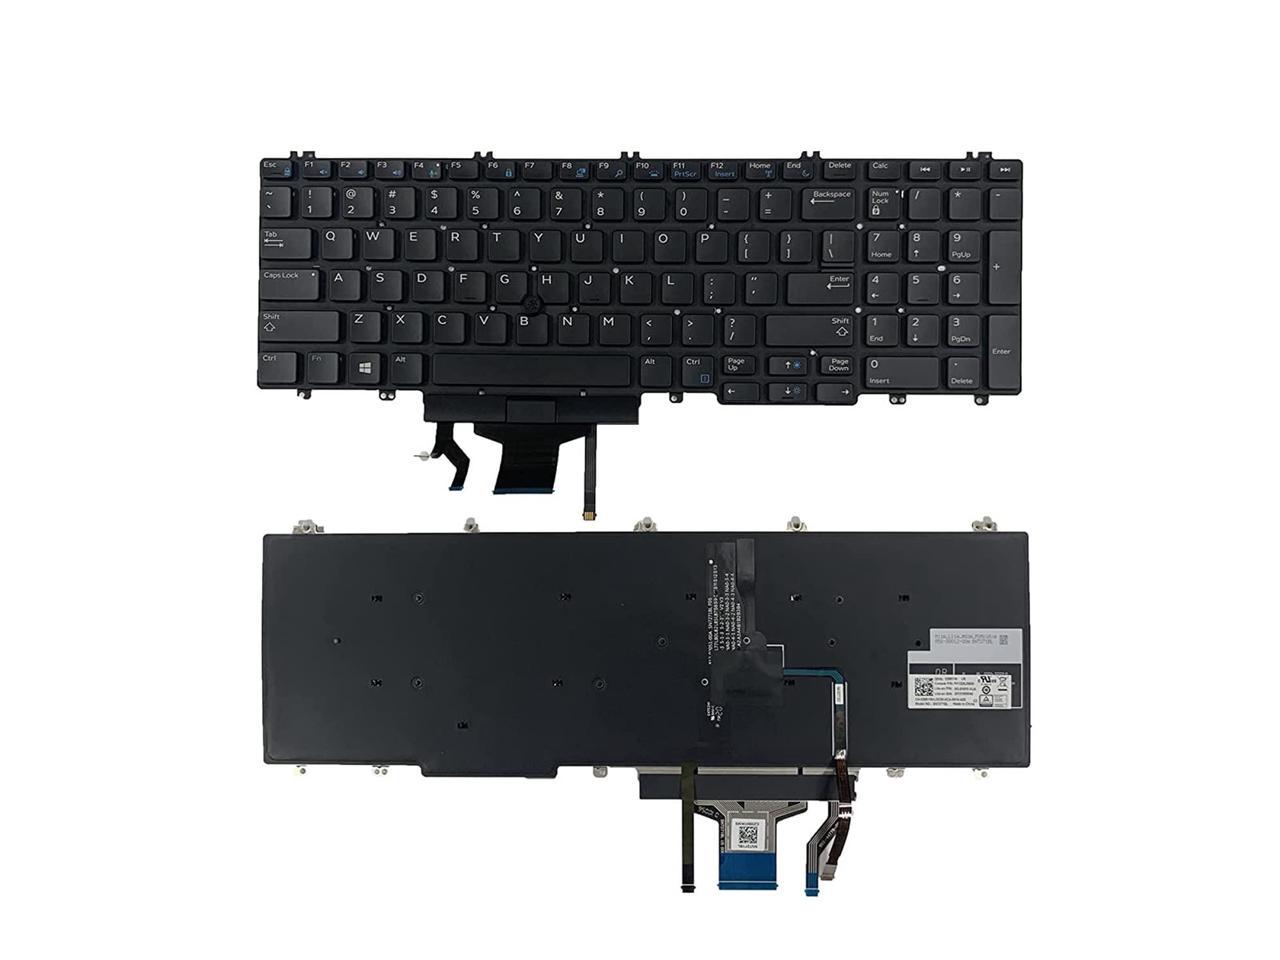 Without Frame ndliulei New US Black Backlit Keyboard Replacement for Dell Precision 3530 M3530 7530 M7530 M7730 7730 Light Backlight